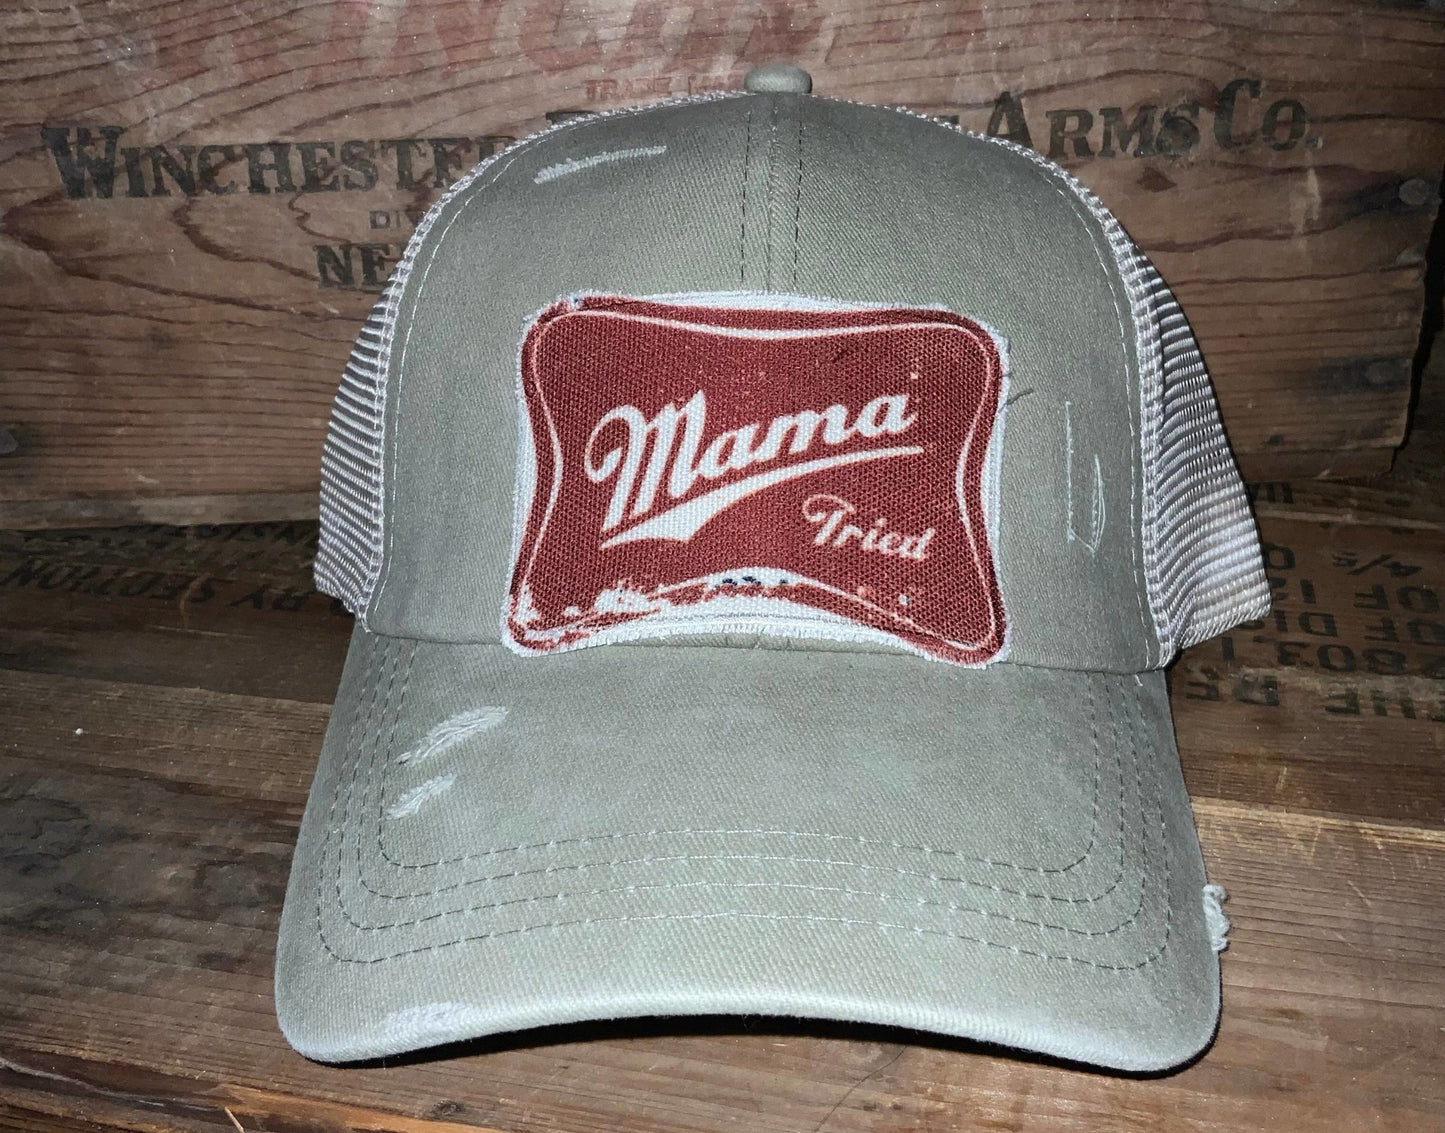 Mama Tried - CountryFide Custom Accessories and Outdoors